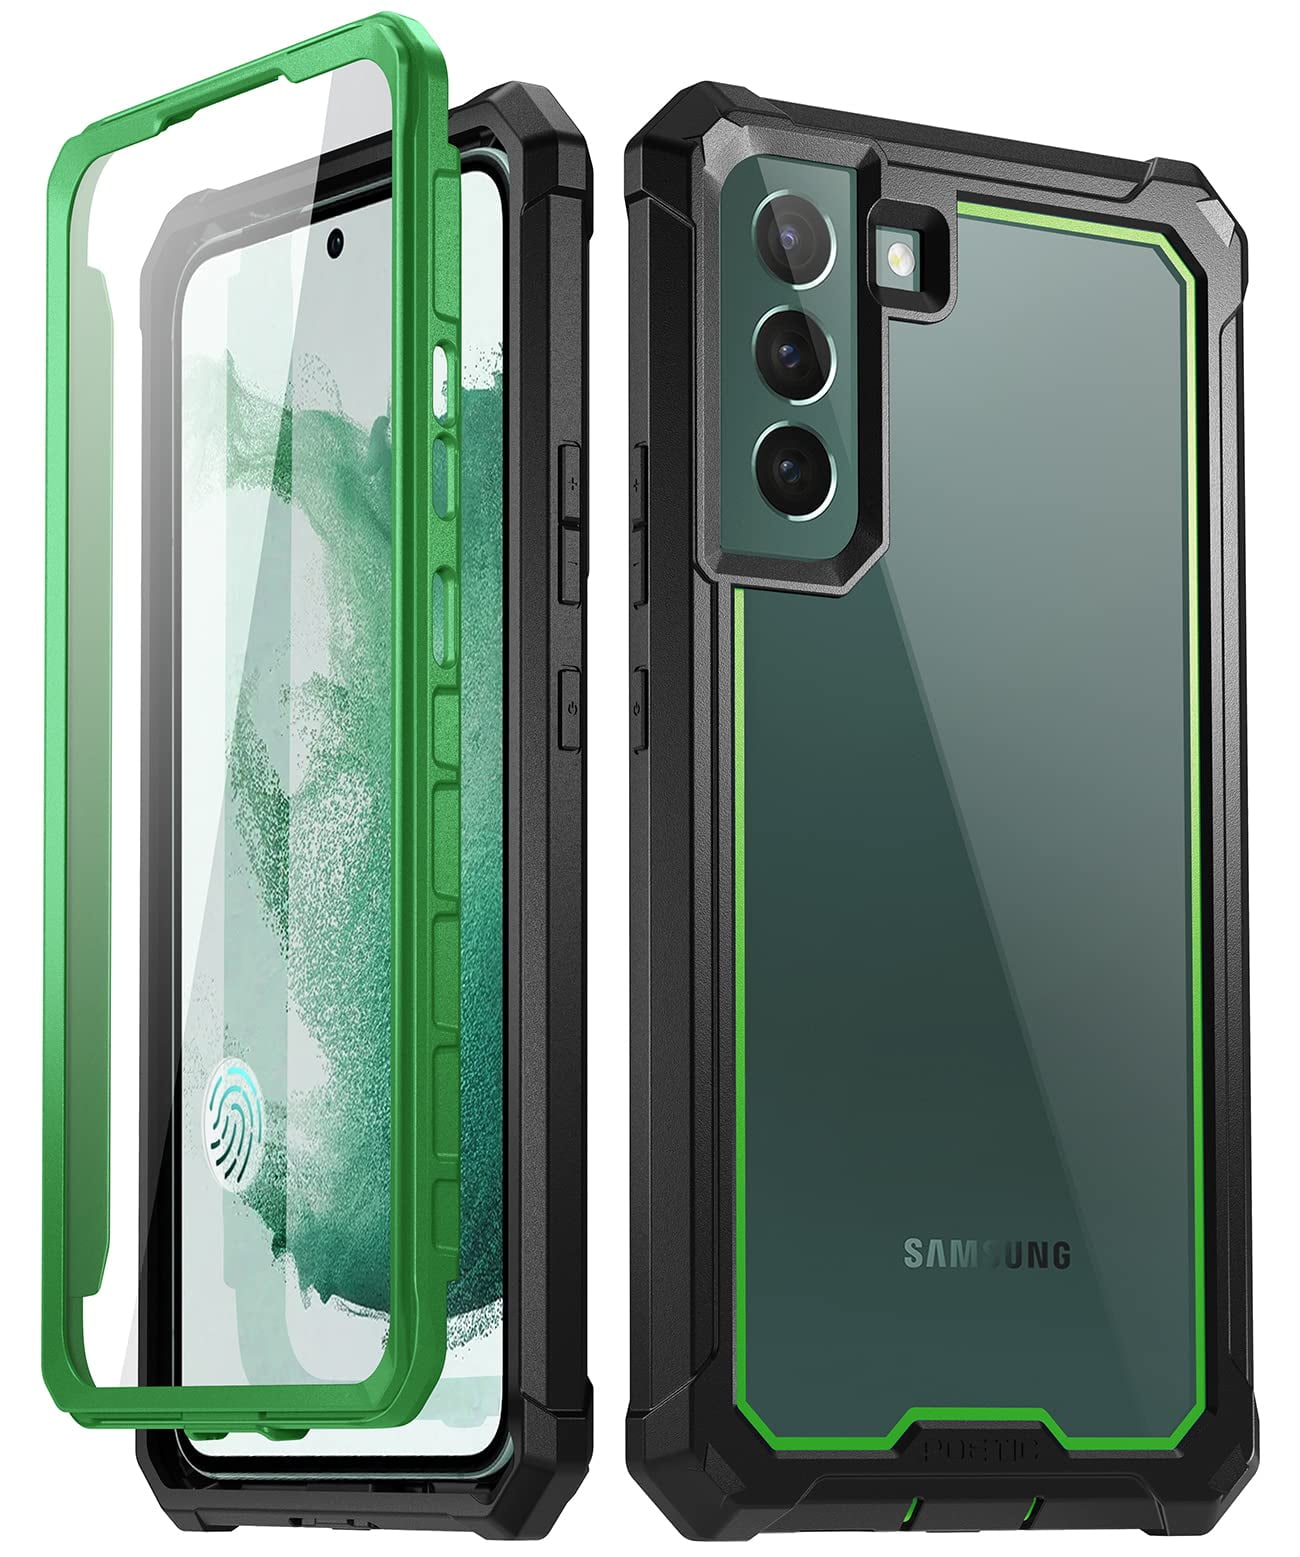 Poetic Guardian Case Designed for Google Pixel 6 5G Green/Clear Built-in Screen Protector Work with Fingerprint ID Full Body Hybrid Shockproof Bumper Cover Case